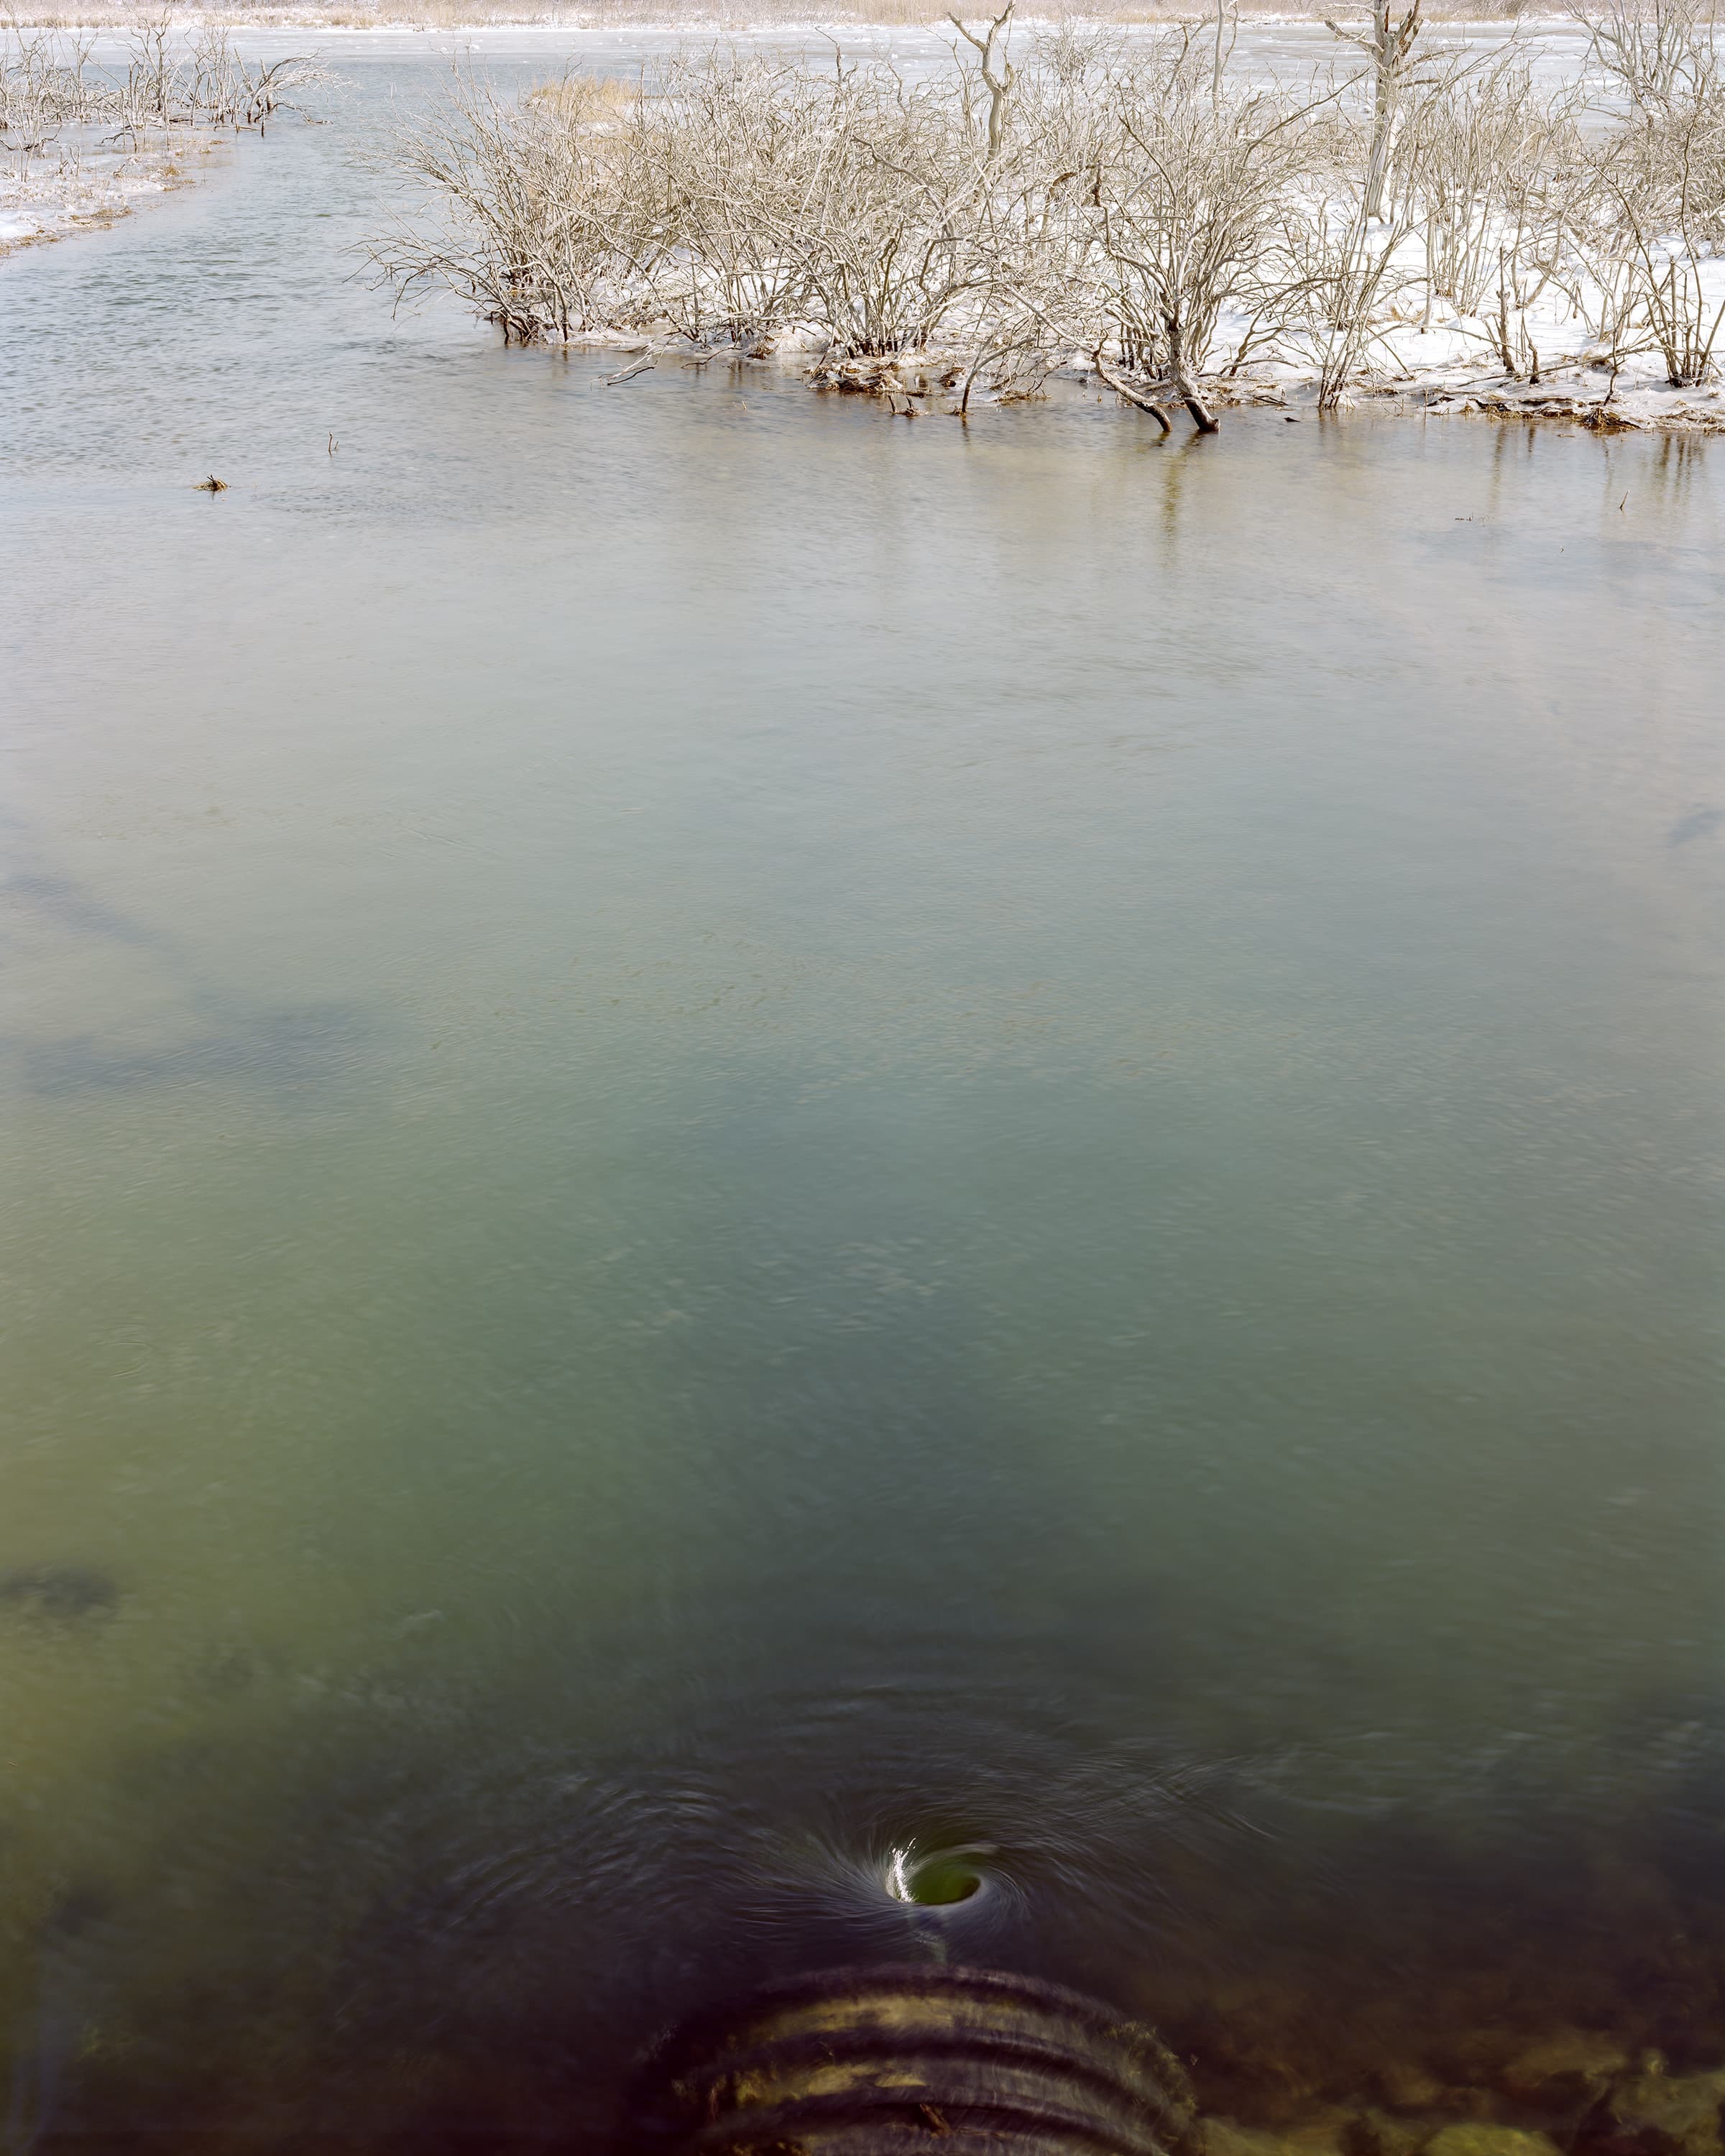 In a pond in the winter, a whirlpool is caused by a large metal pipe in the foreground.